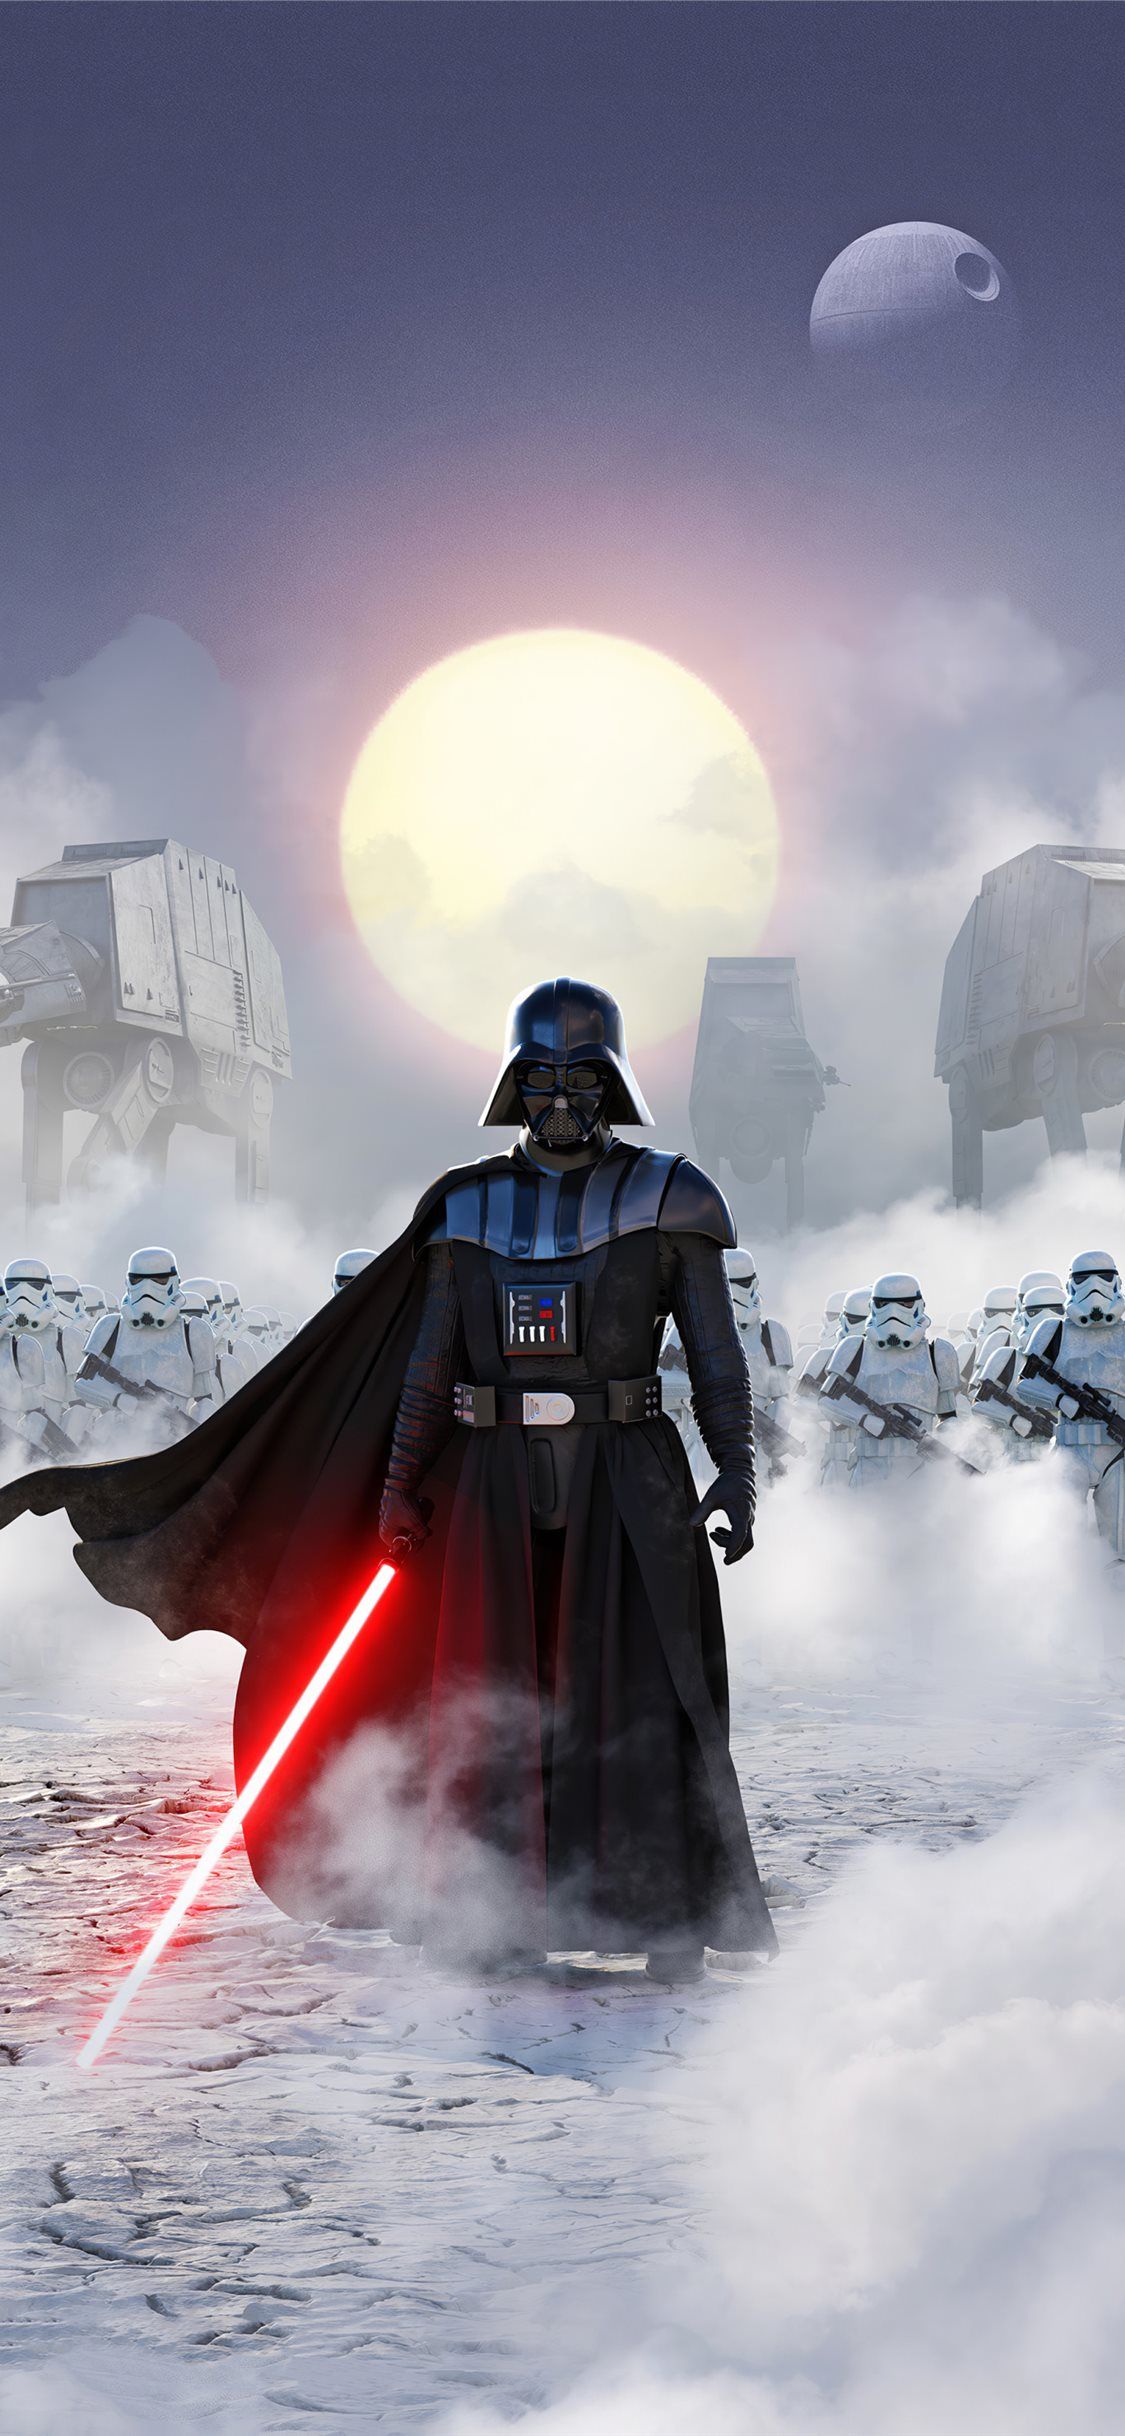 Darth Vader Star Wars wallpaper for iPhone with high-resolution 1080x1920 pixel. You can use this wallpaper for your iPhone 5, 6, 7, 8, X, XS, XR backgrounds, Mobile Screensaver, or iPad Lock Screen - Star Wars